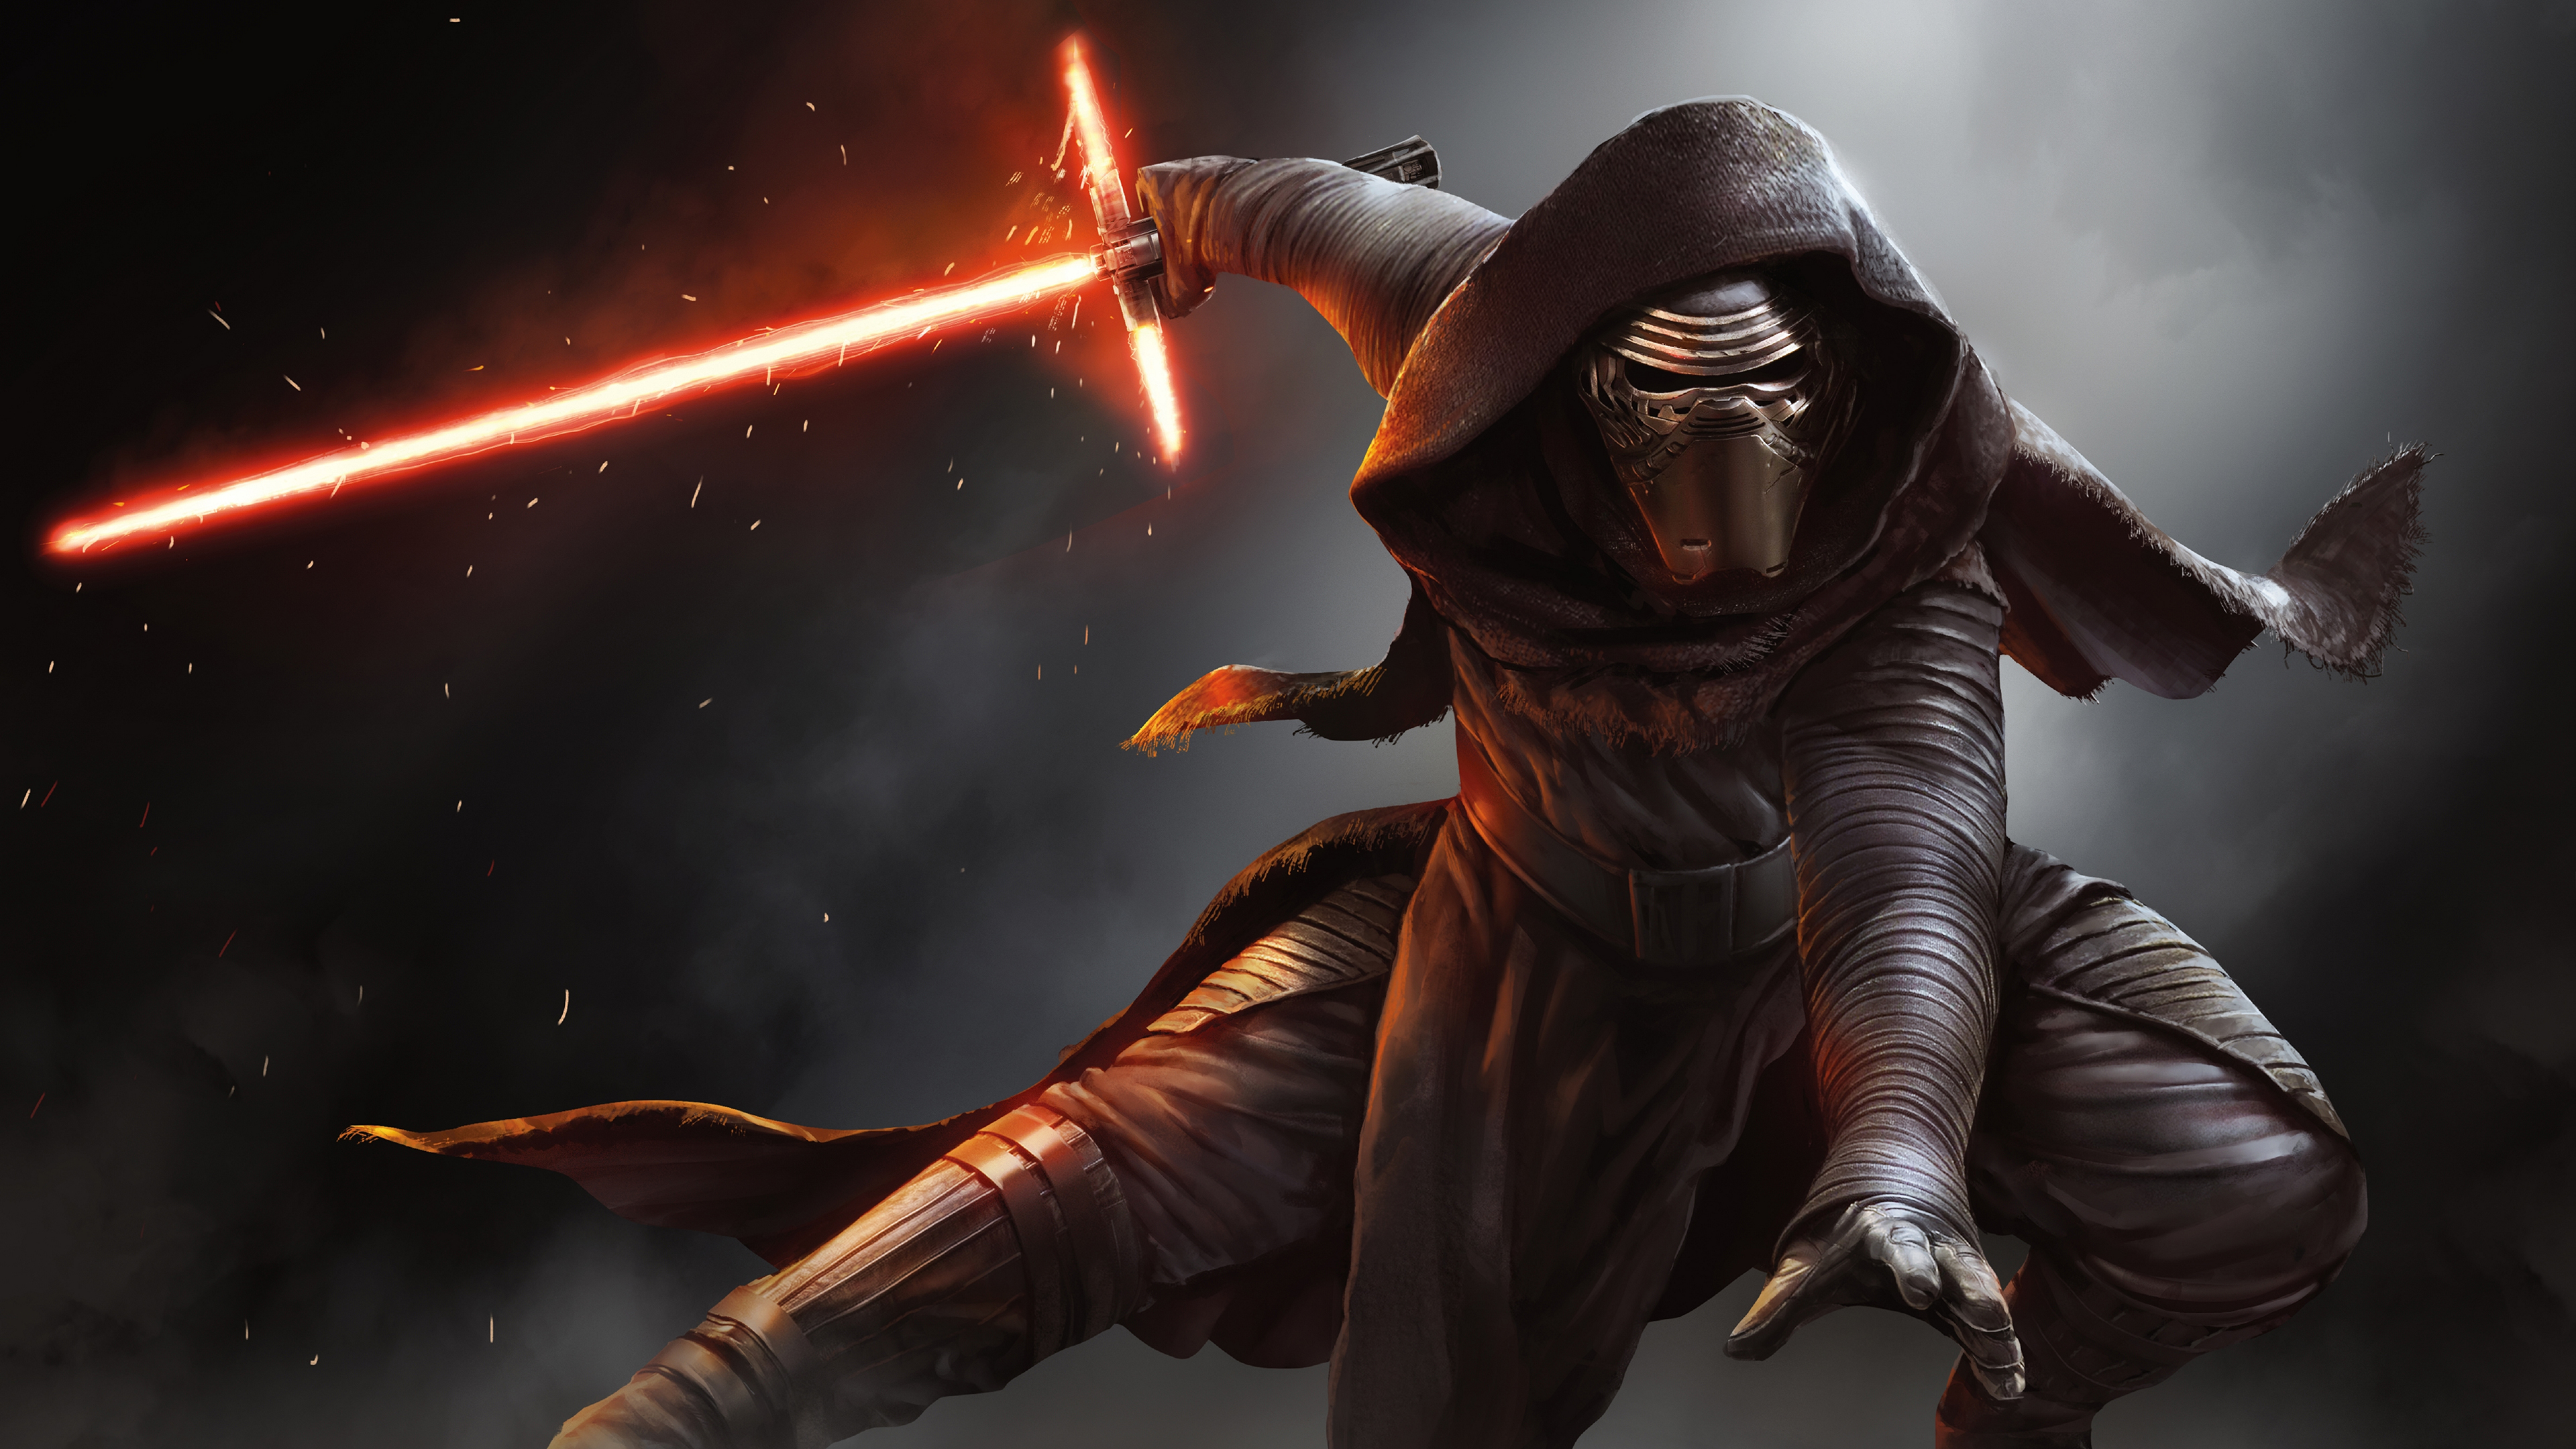 Star Wars The Force Awakens Wallpaper Awesome